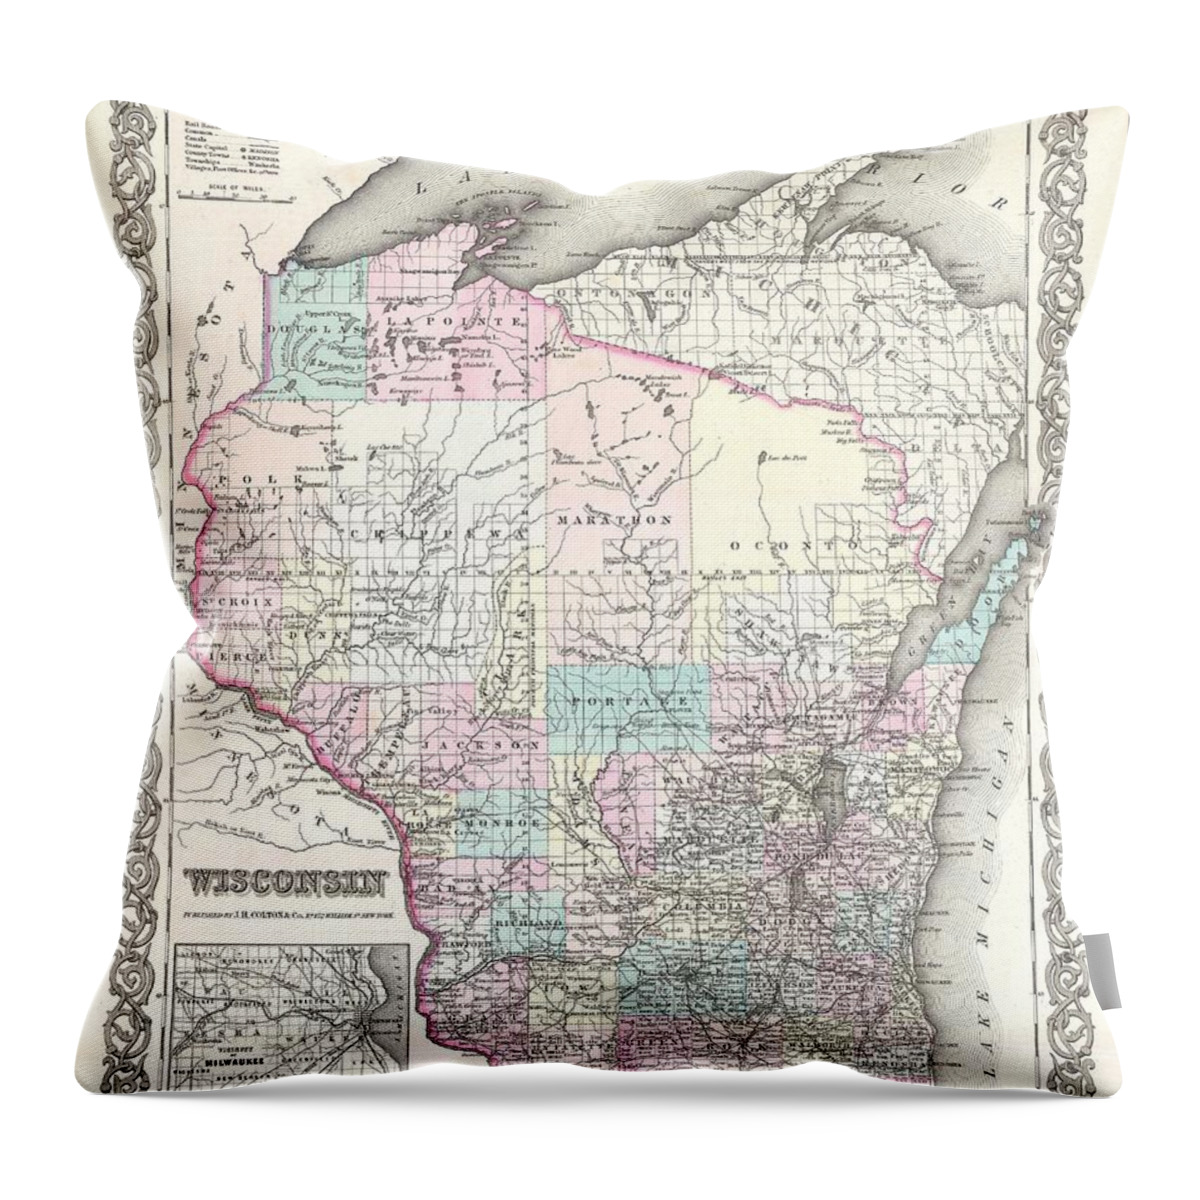 Antique Map Of Wisconsin Throw Pillow featuring the drawing Antique Maps - Old Cartographic maps - Antique Map of Wisconsin, 1855 by Studio Grafiikka